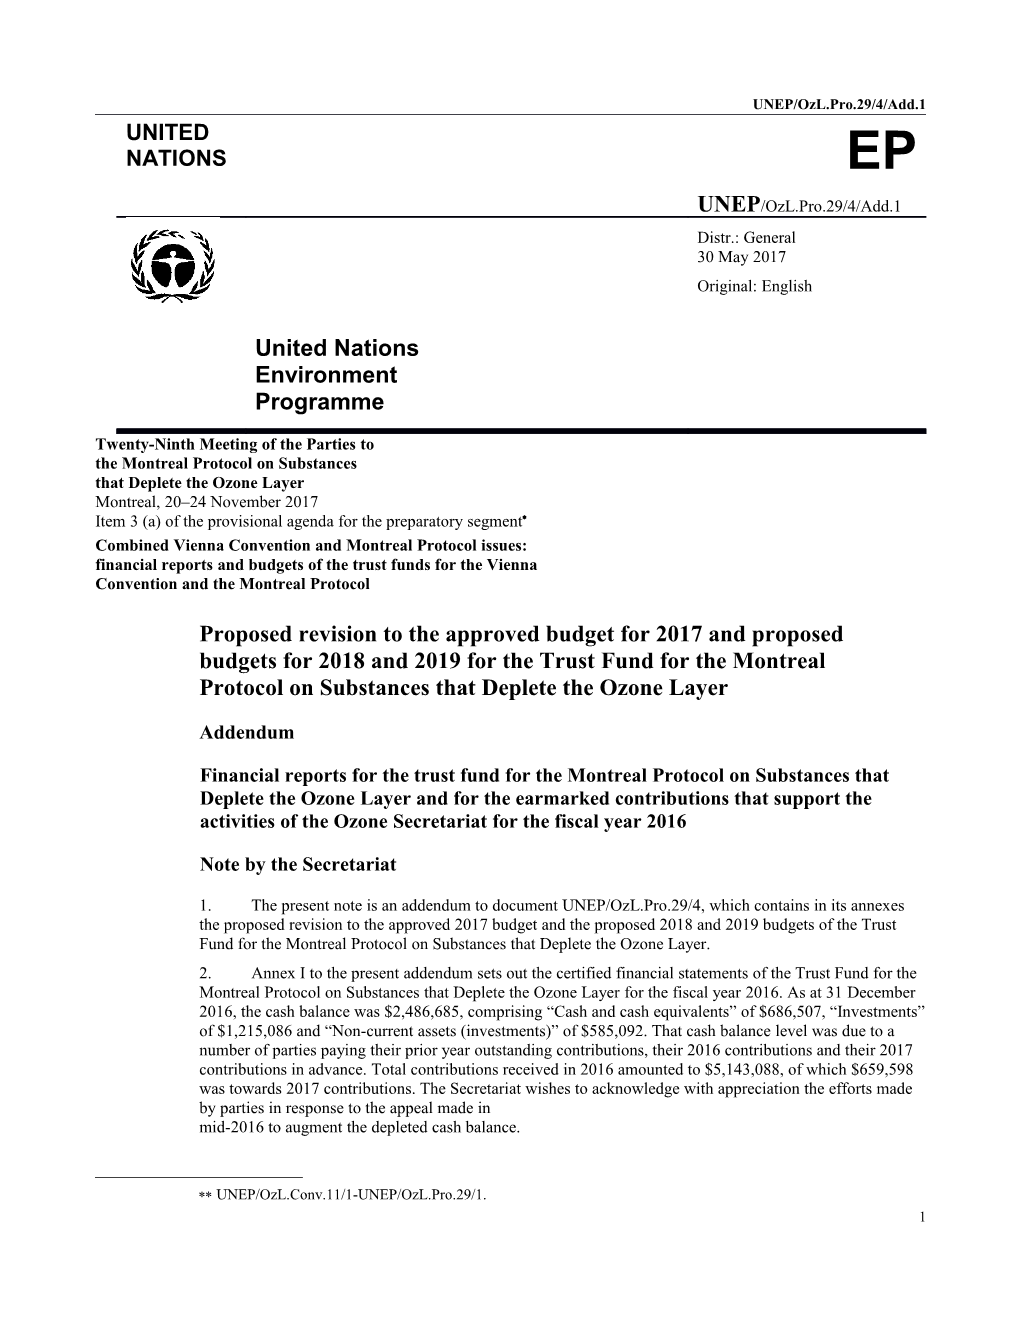 Financial Reports for the Trust Fund for the Montreal Protocol on Substances That Deplete